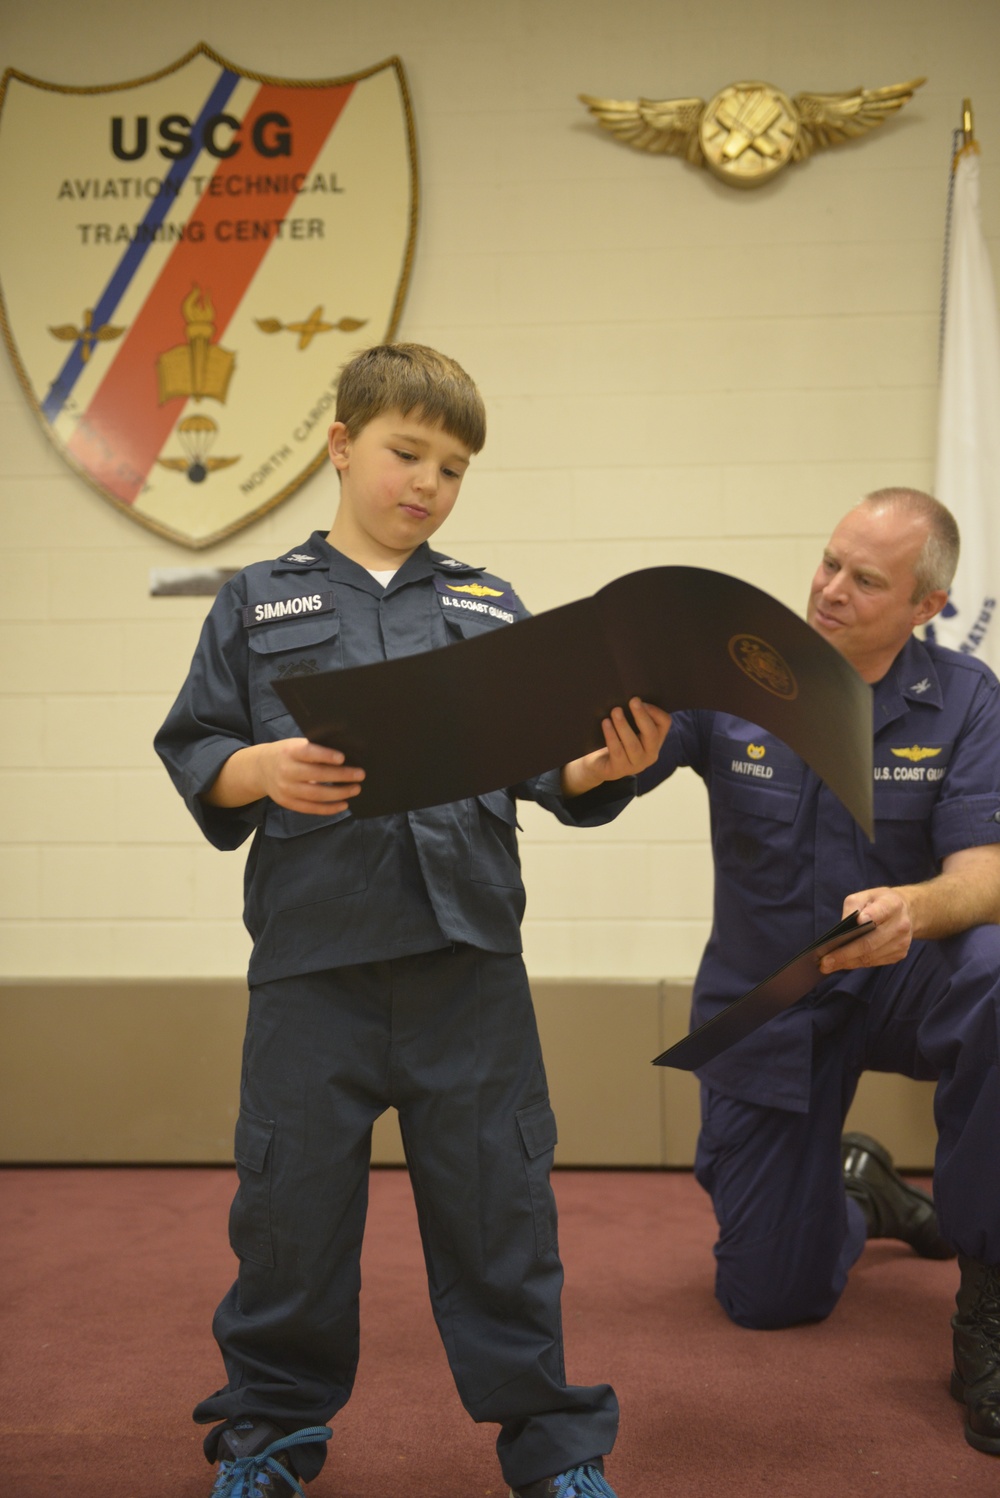 Coast Guard dream becomes reality for youngest recruit